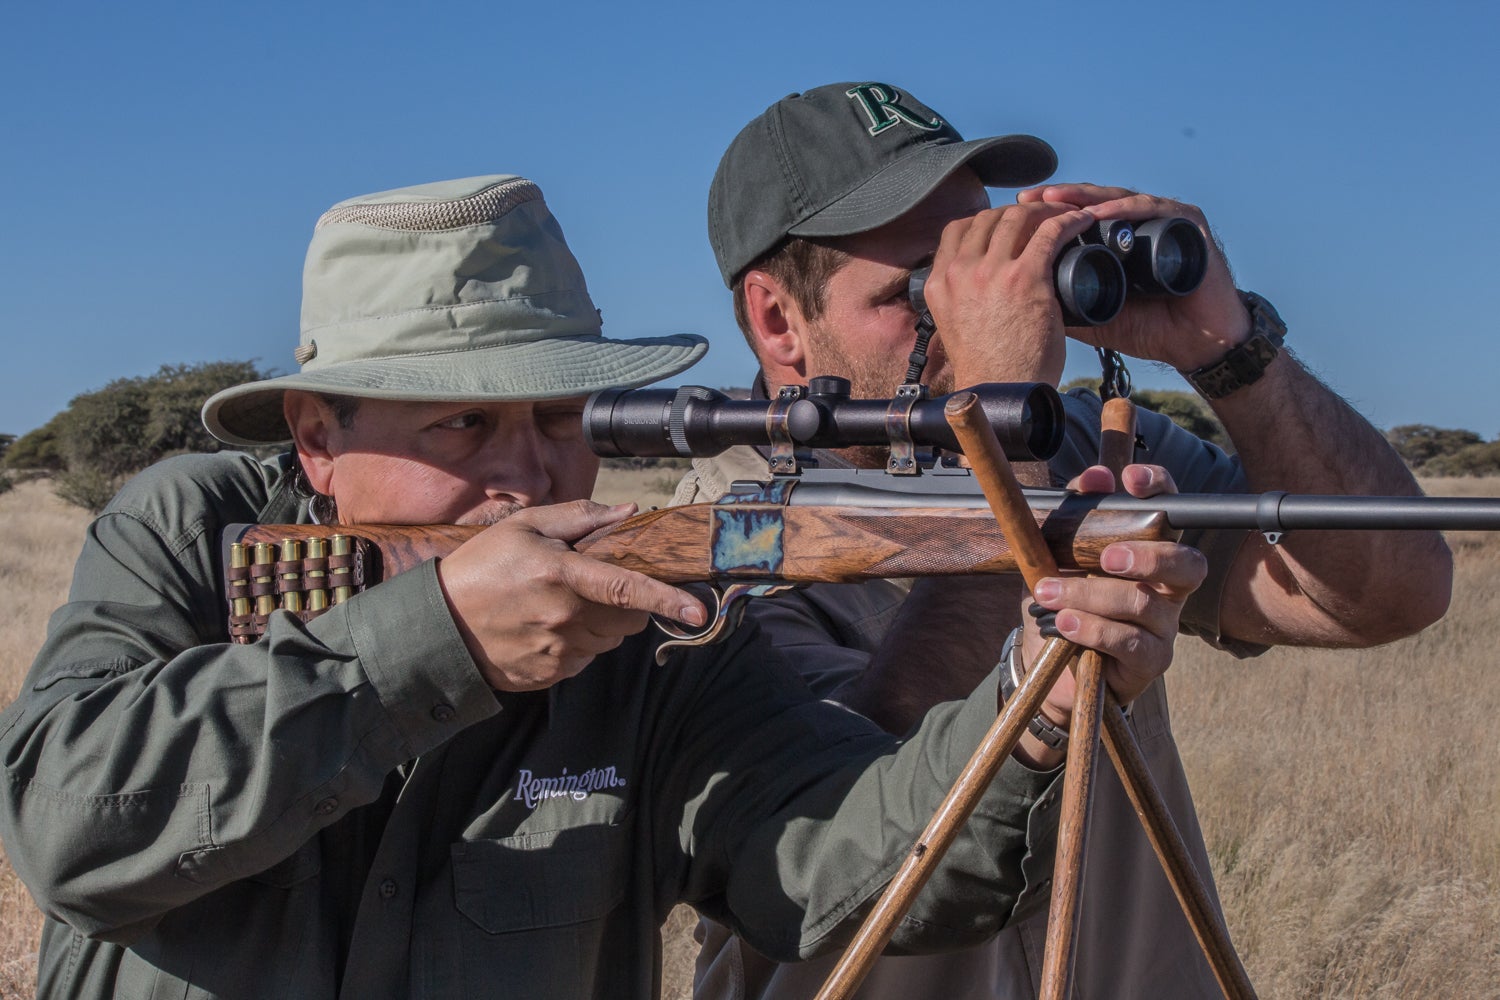 A hunter fires a rifle off shooting sticks in Africa, as his guide watches through binoculars